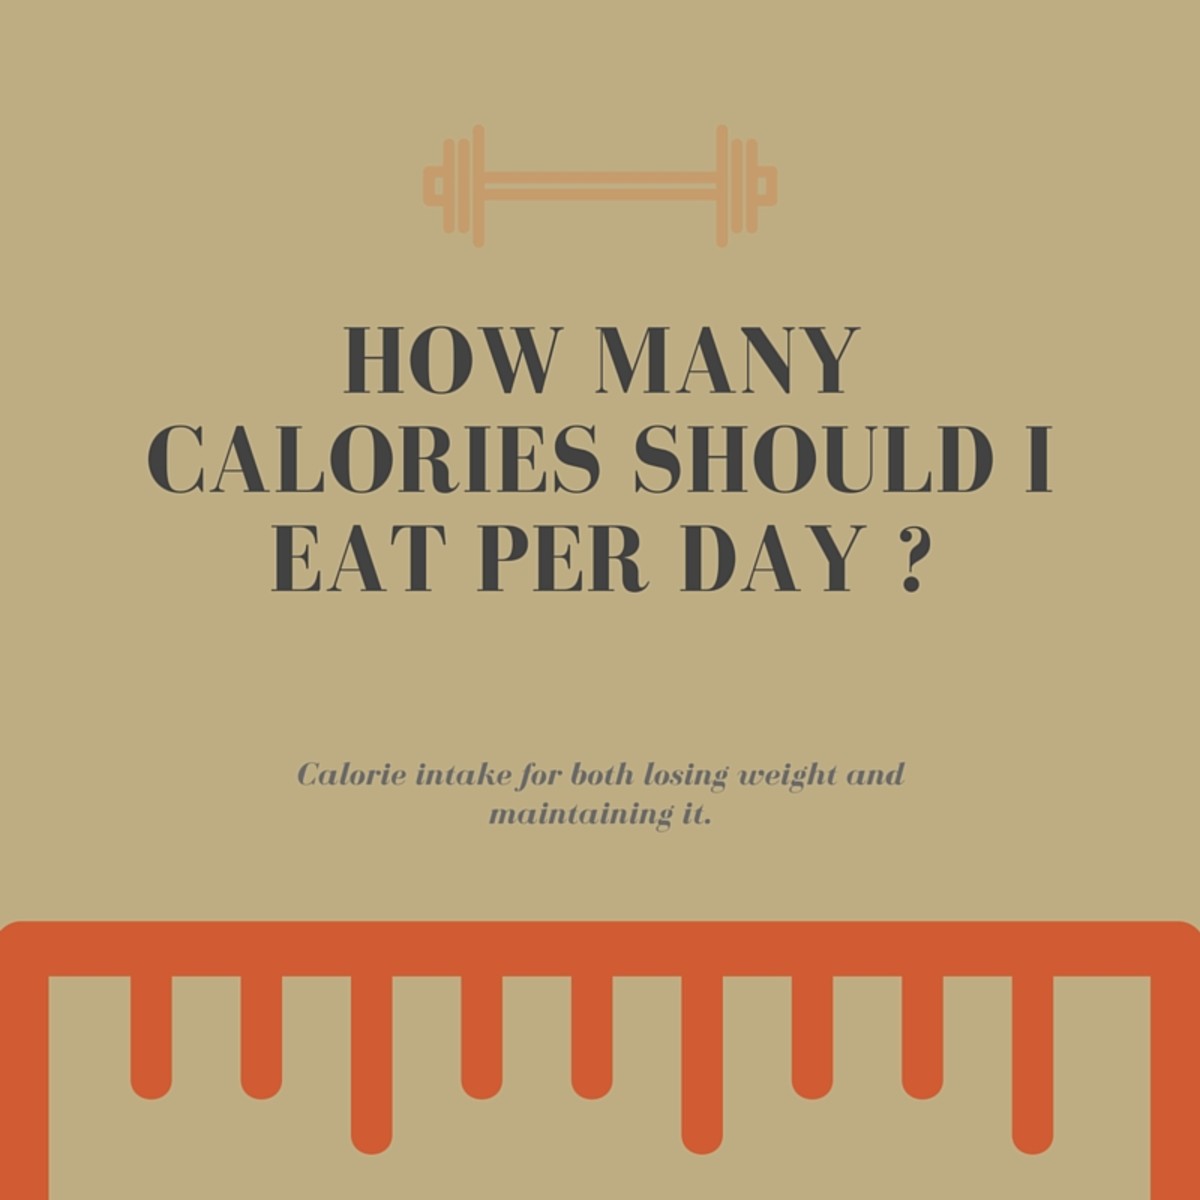 how much calories to lose weight in a day